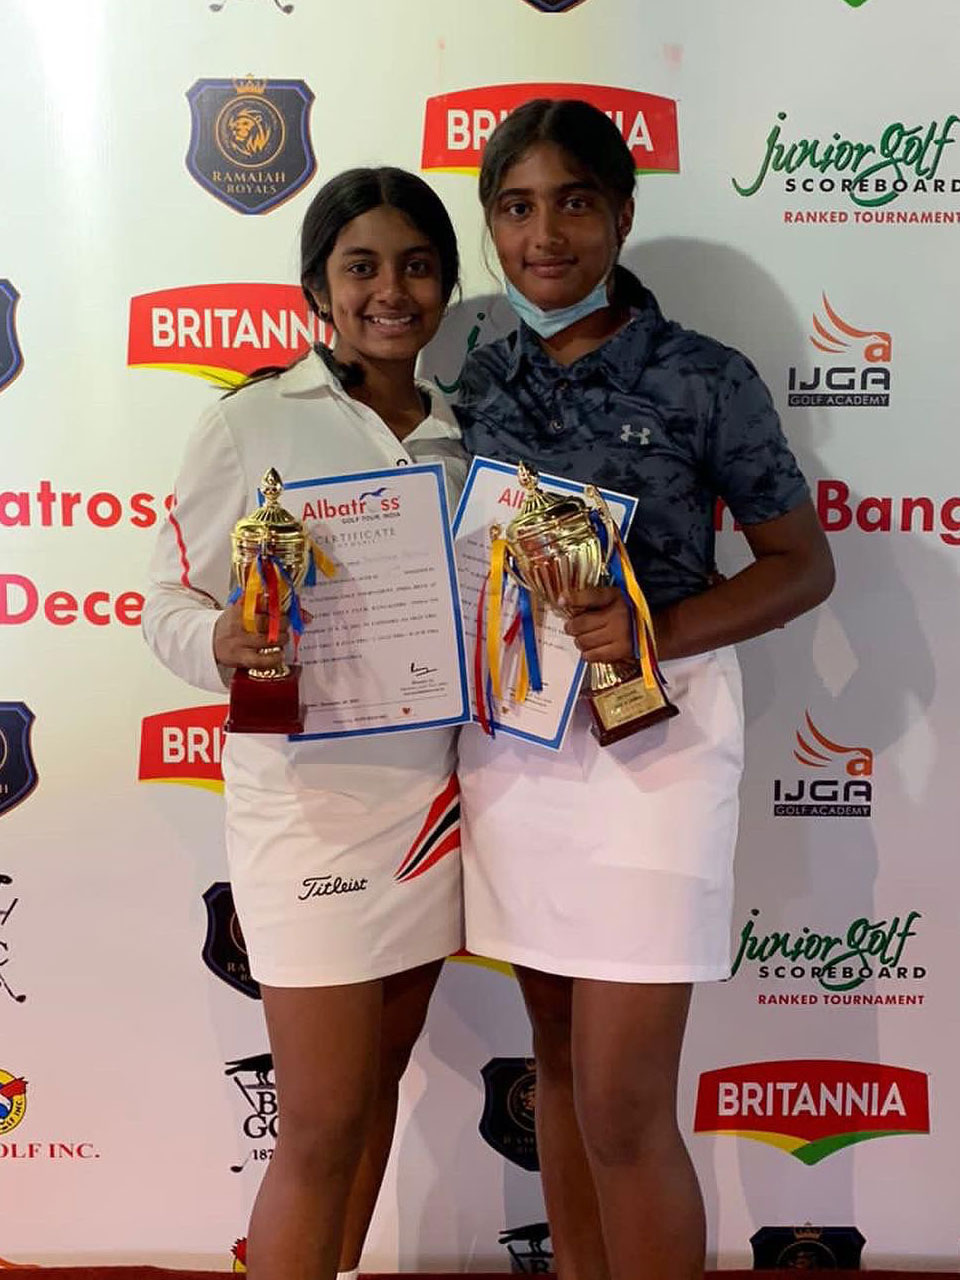 Keerthana and Tanishka finish 1st and 2nd respectively at the BGC Albatross Junior open in Category B Girls